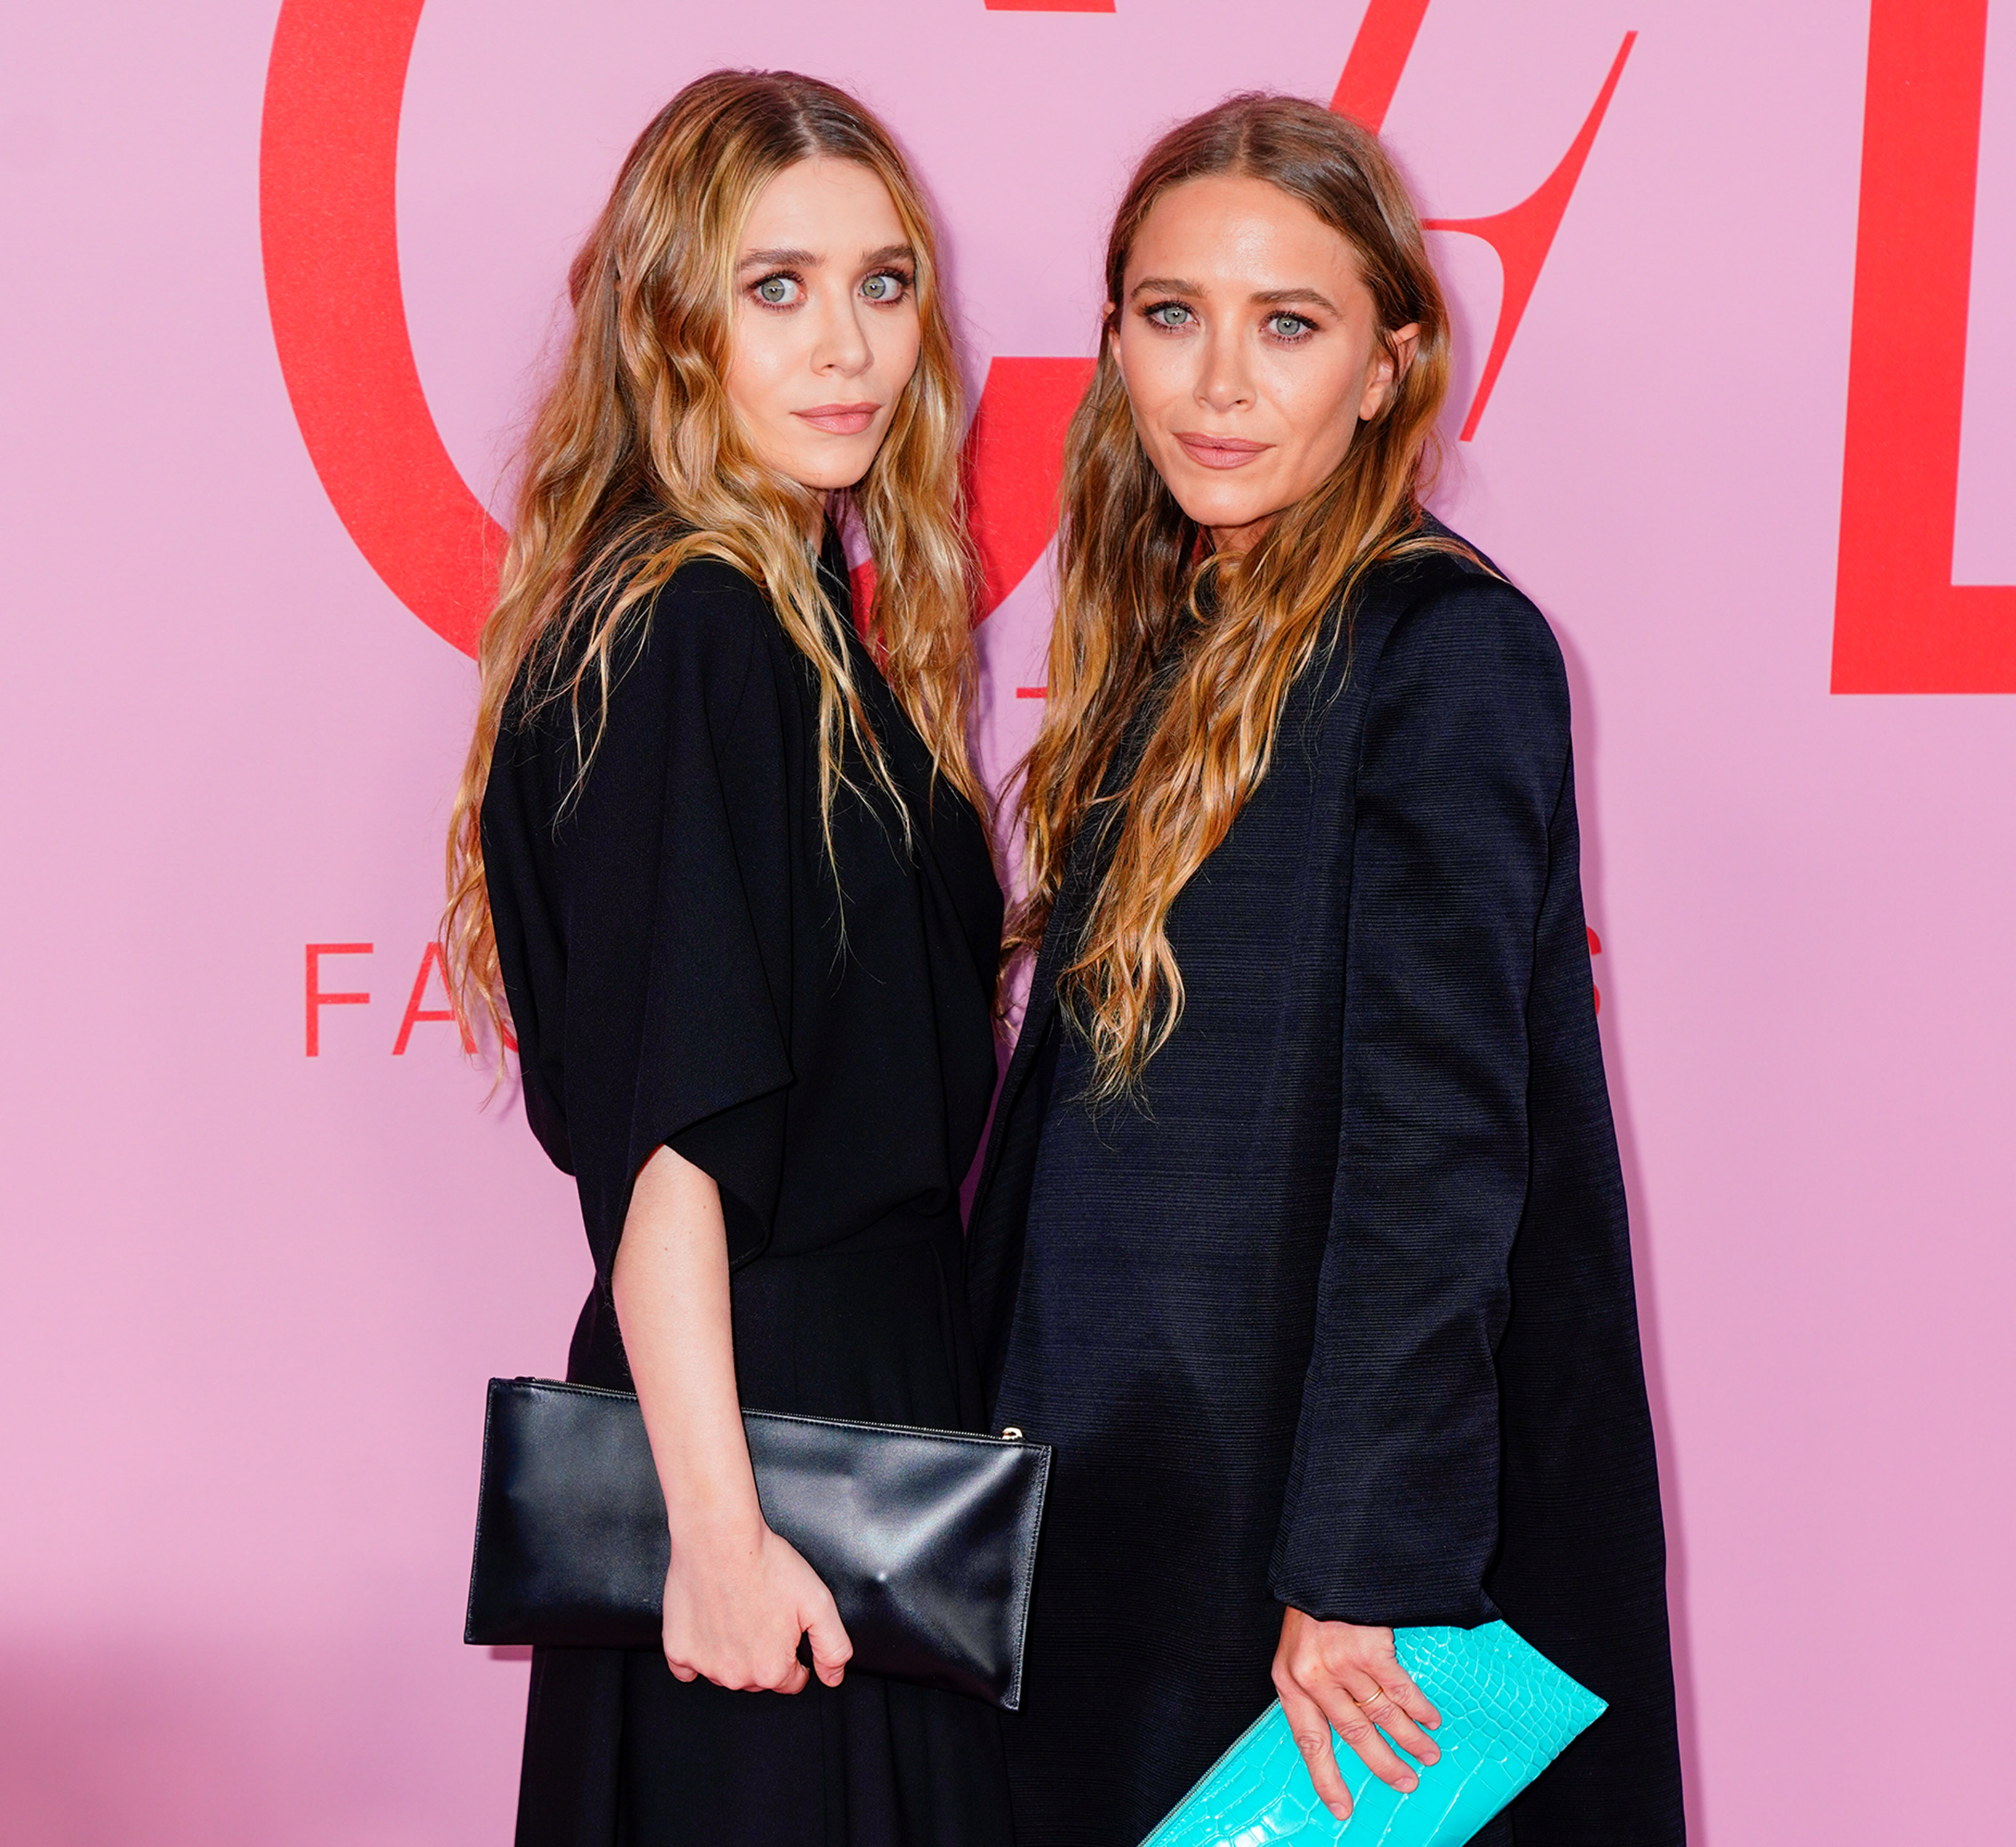 Mary Kate Olsen and Ashley Olsen at CFDA Awards on June 3, 2019 in New York City